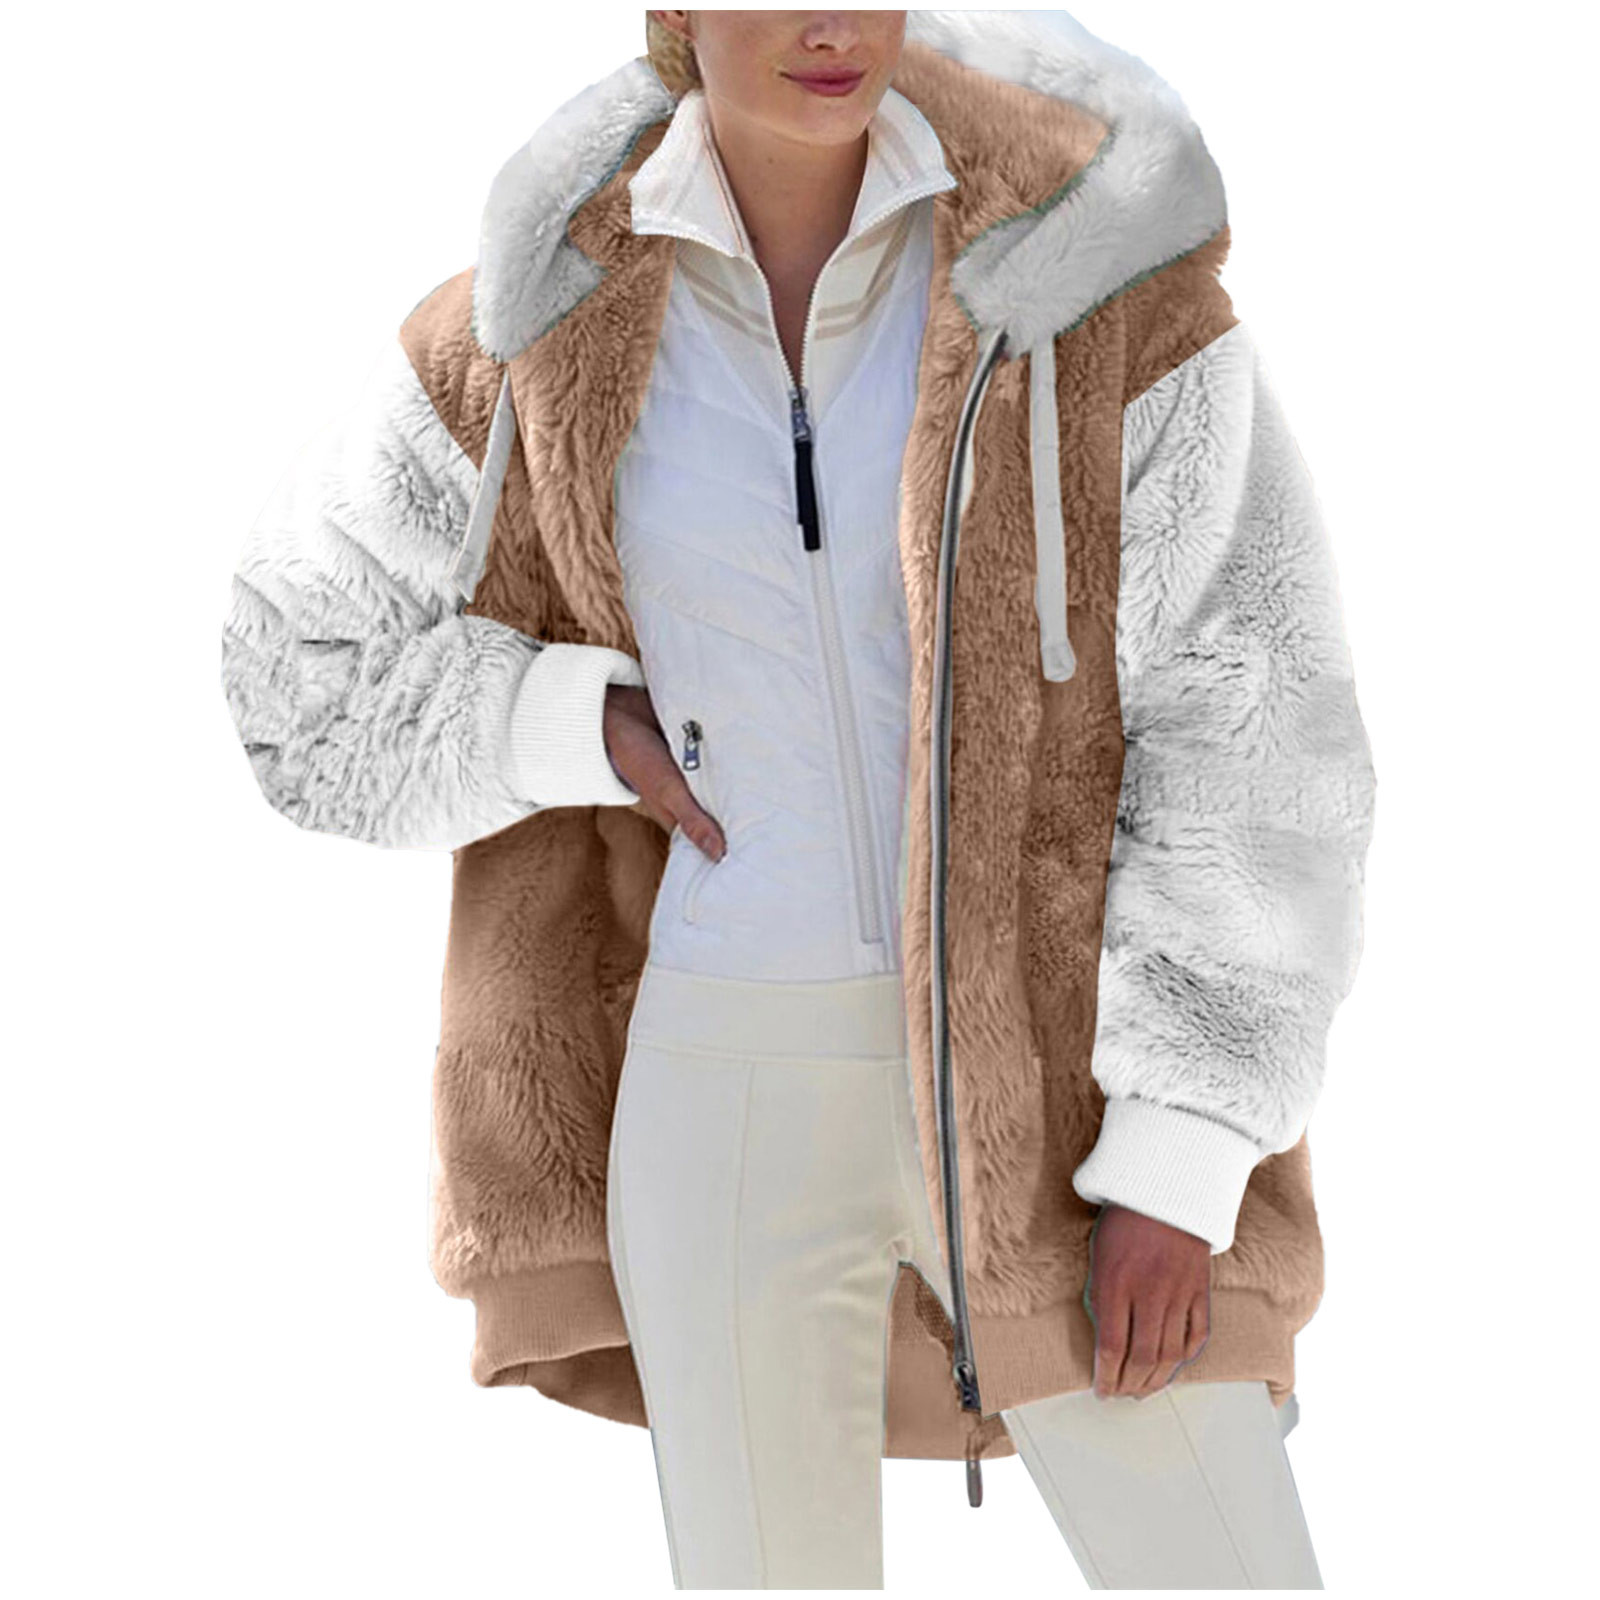 Winter Coat Womens Fashion Plus Size Extreme Cold Weather Outwear Thicken Furry Lined Thermal Down Jacket Clothing - image 1 of 6